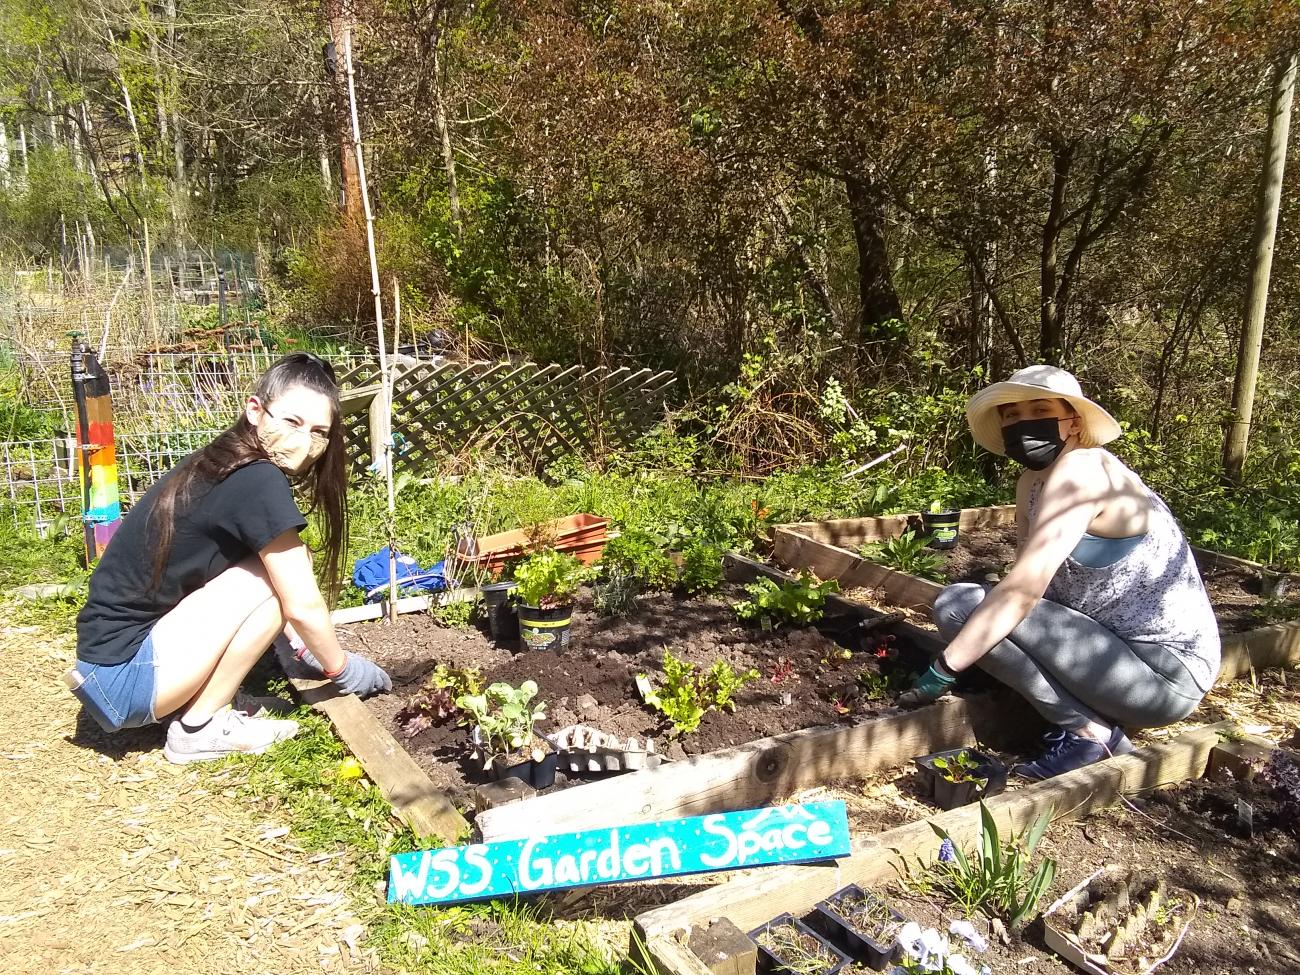 Students working in the WSS Garden